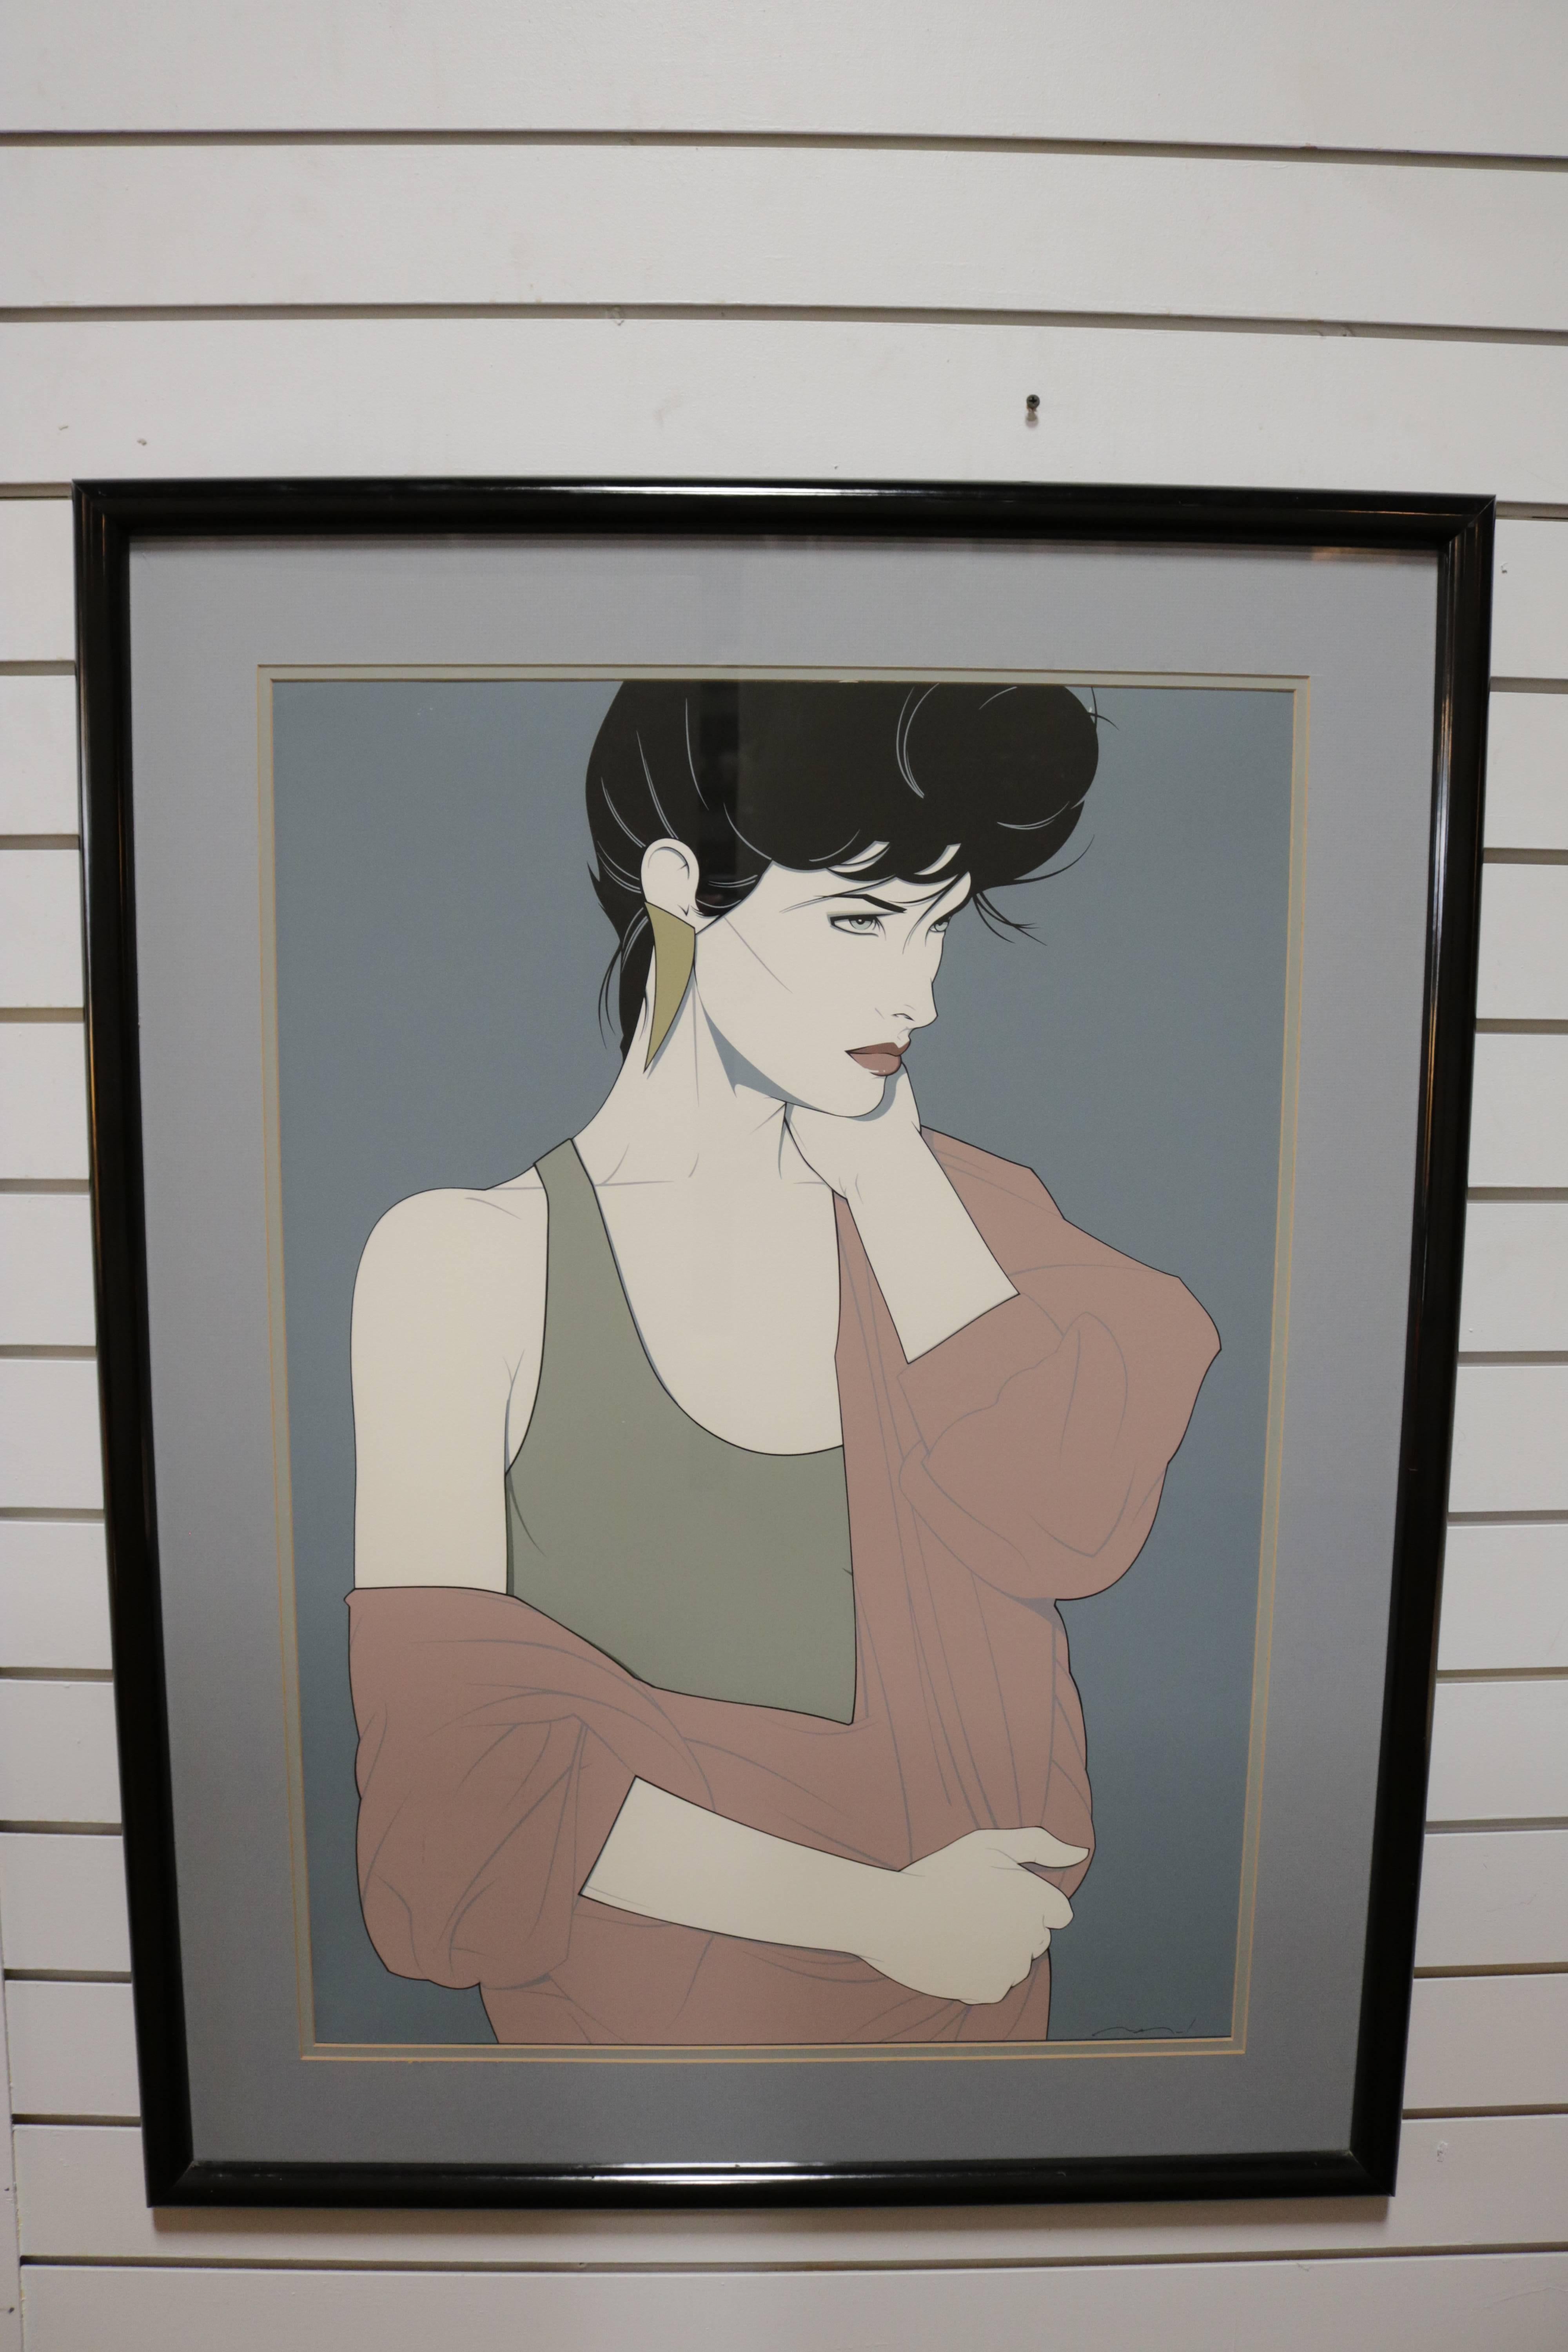 Patrick Nagel was an American artist who did work for Playboy magazine throughout the 1980s. He created popular illustrations on board, paper and canvas, most of which emphasize the female form in a distinctive style descended from Art Deco.